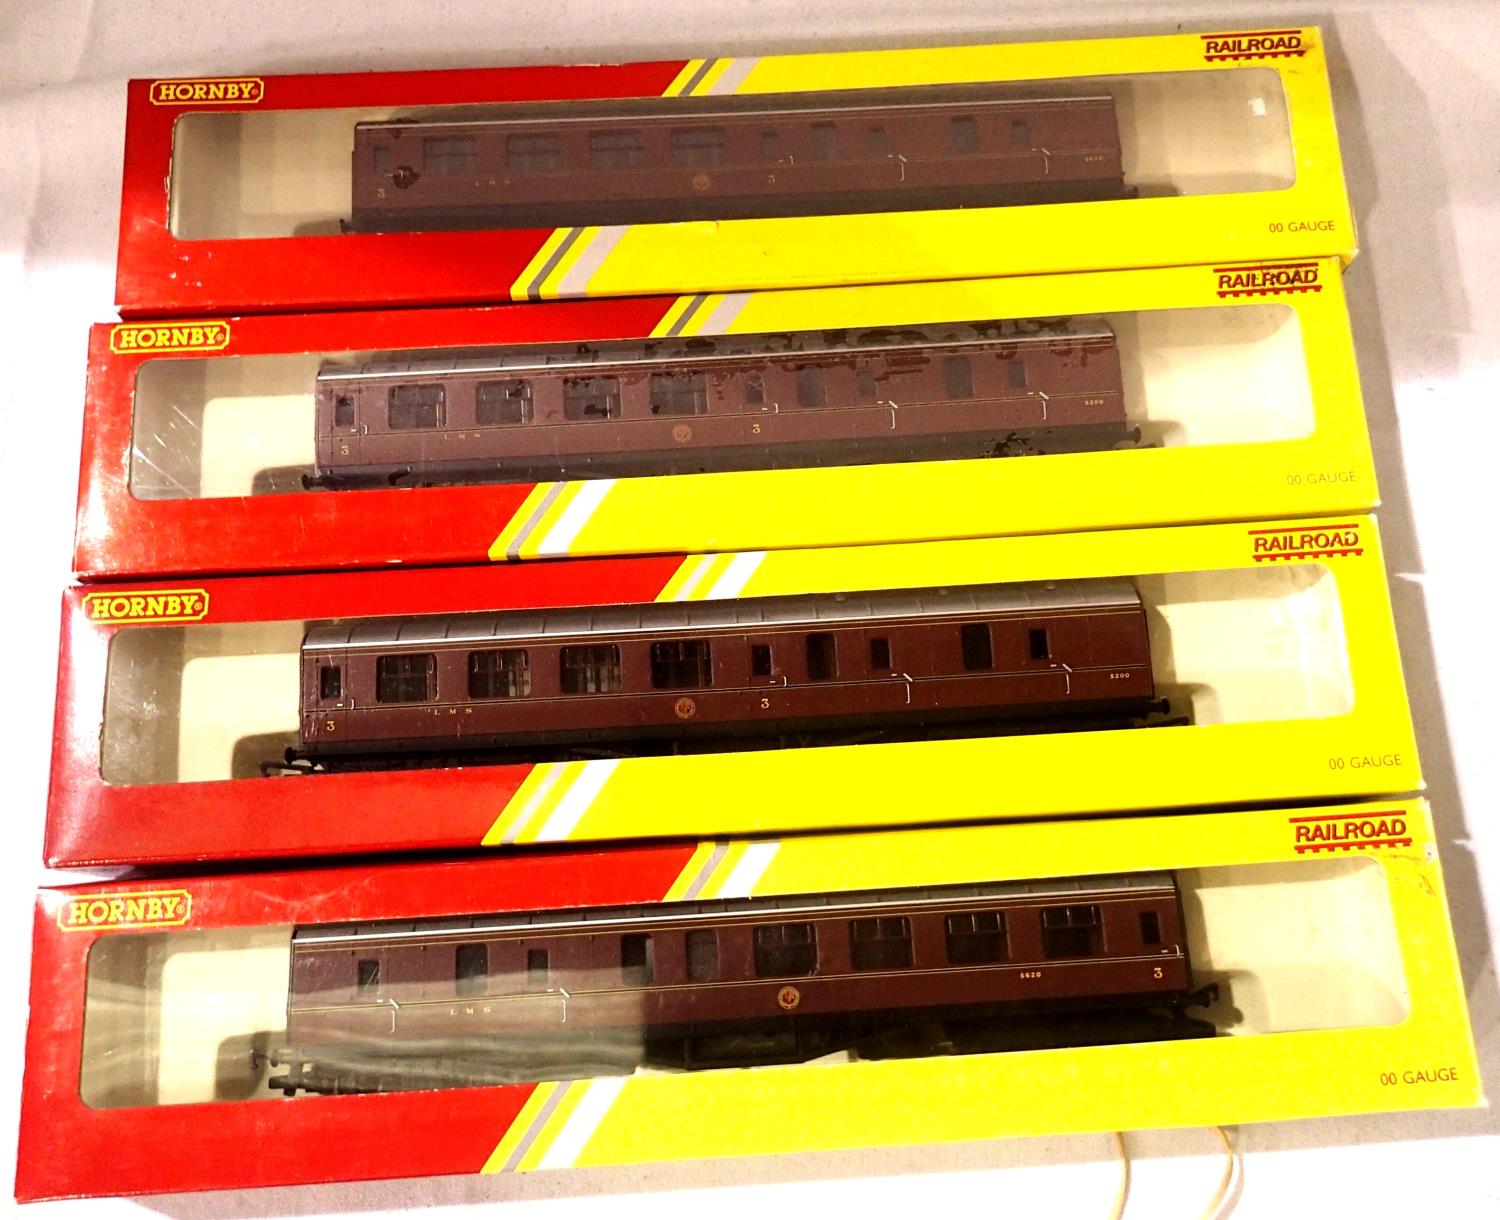 Four Hornby OO LMS maroon coaches; R4389, R4389U x2 and R4232 - U01. All in very good - excellent